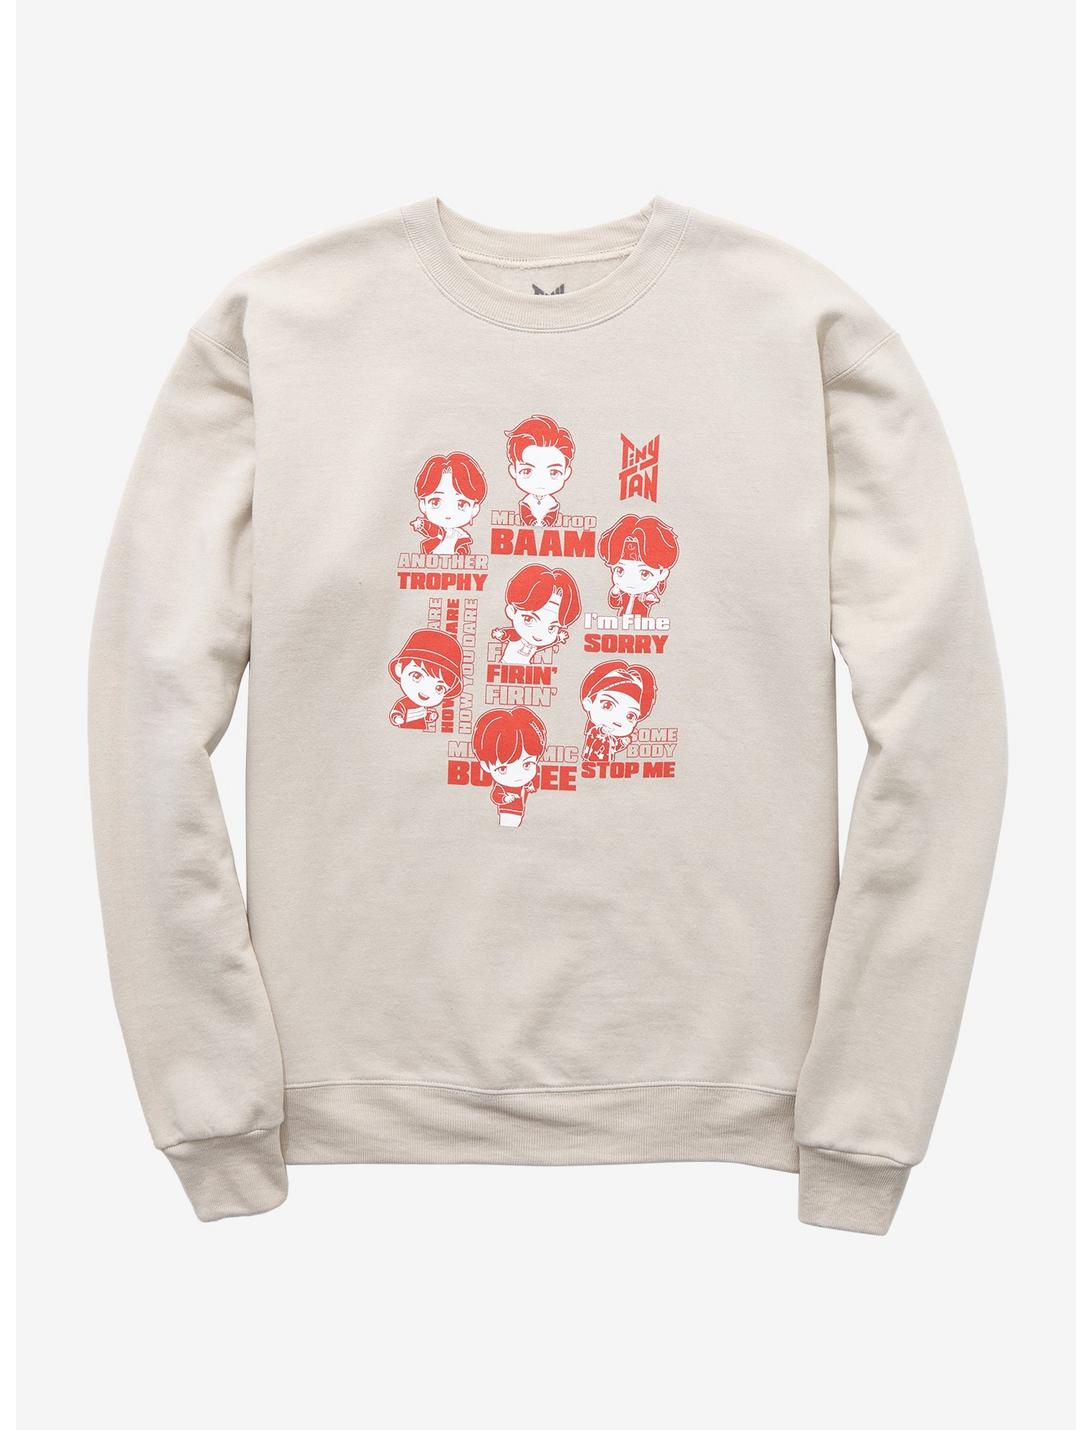 TinyTAN Girls Sweatshirt Inspired By BTS Hot Topic Exclusive, IVORY, hi-res